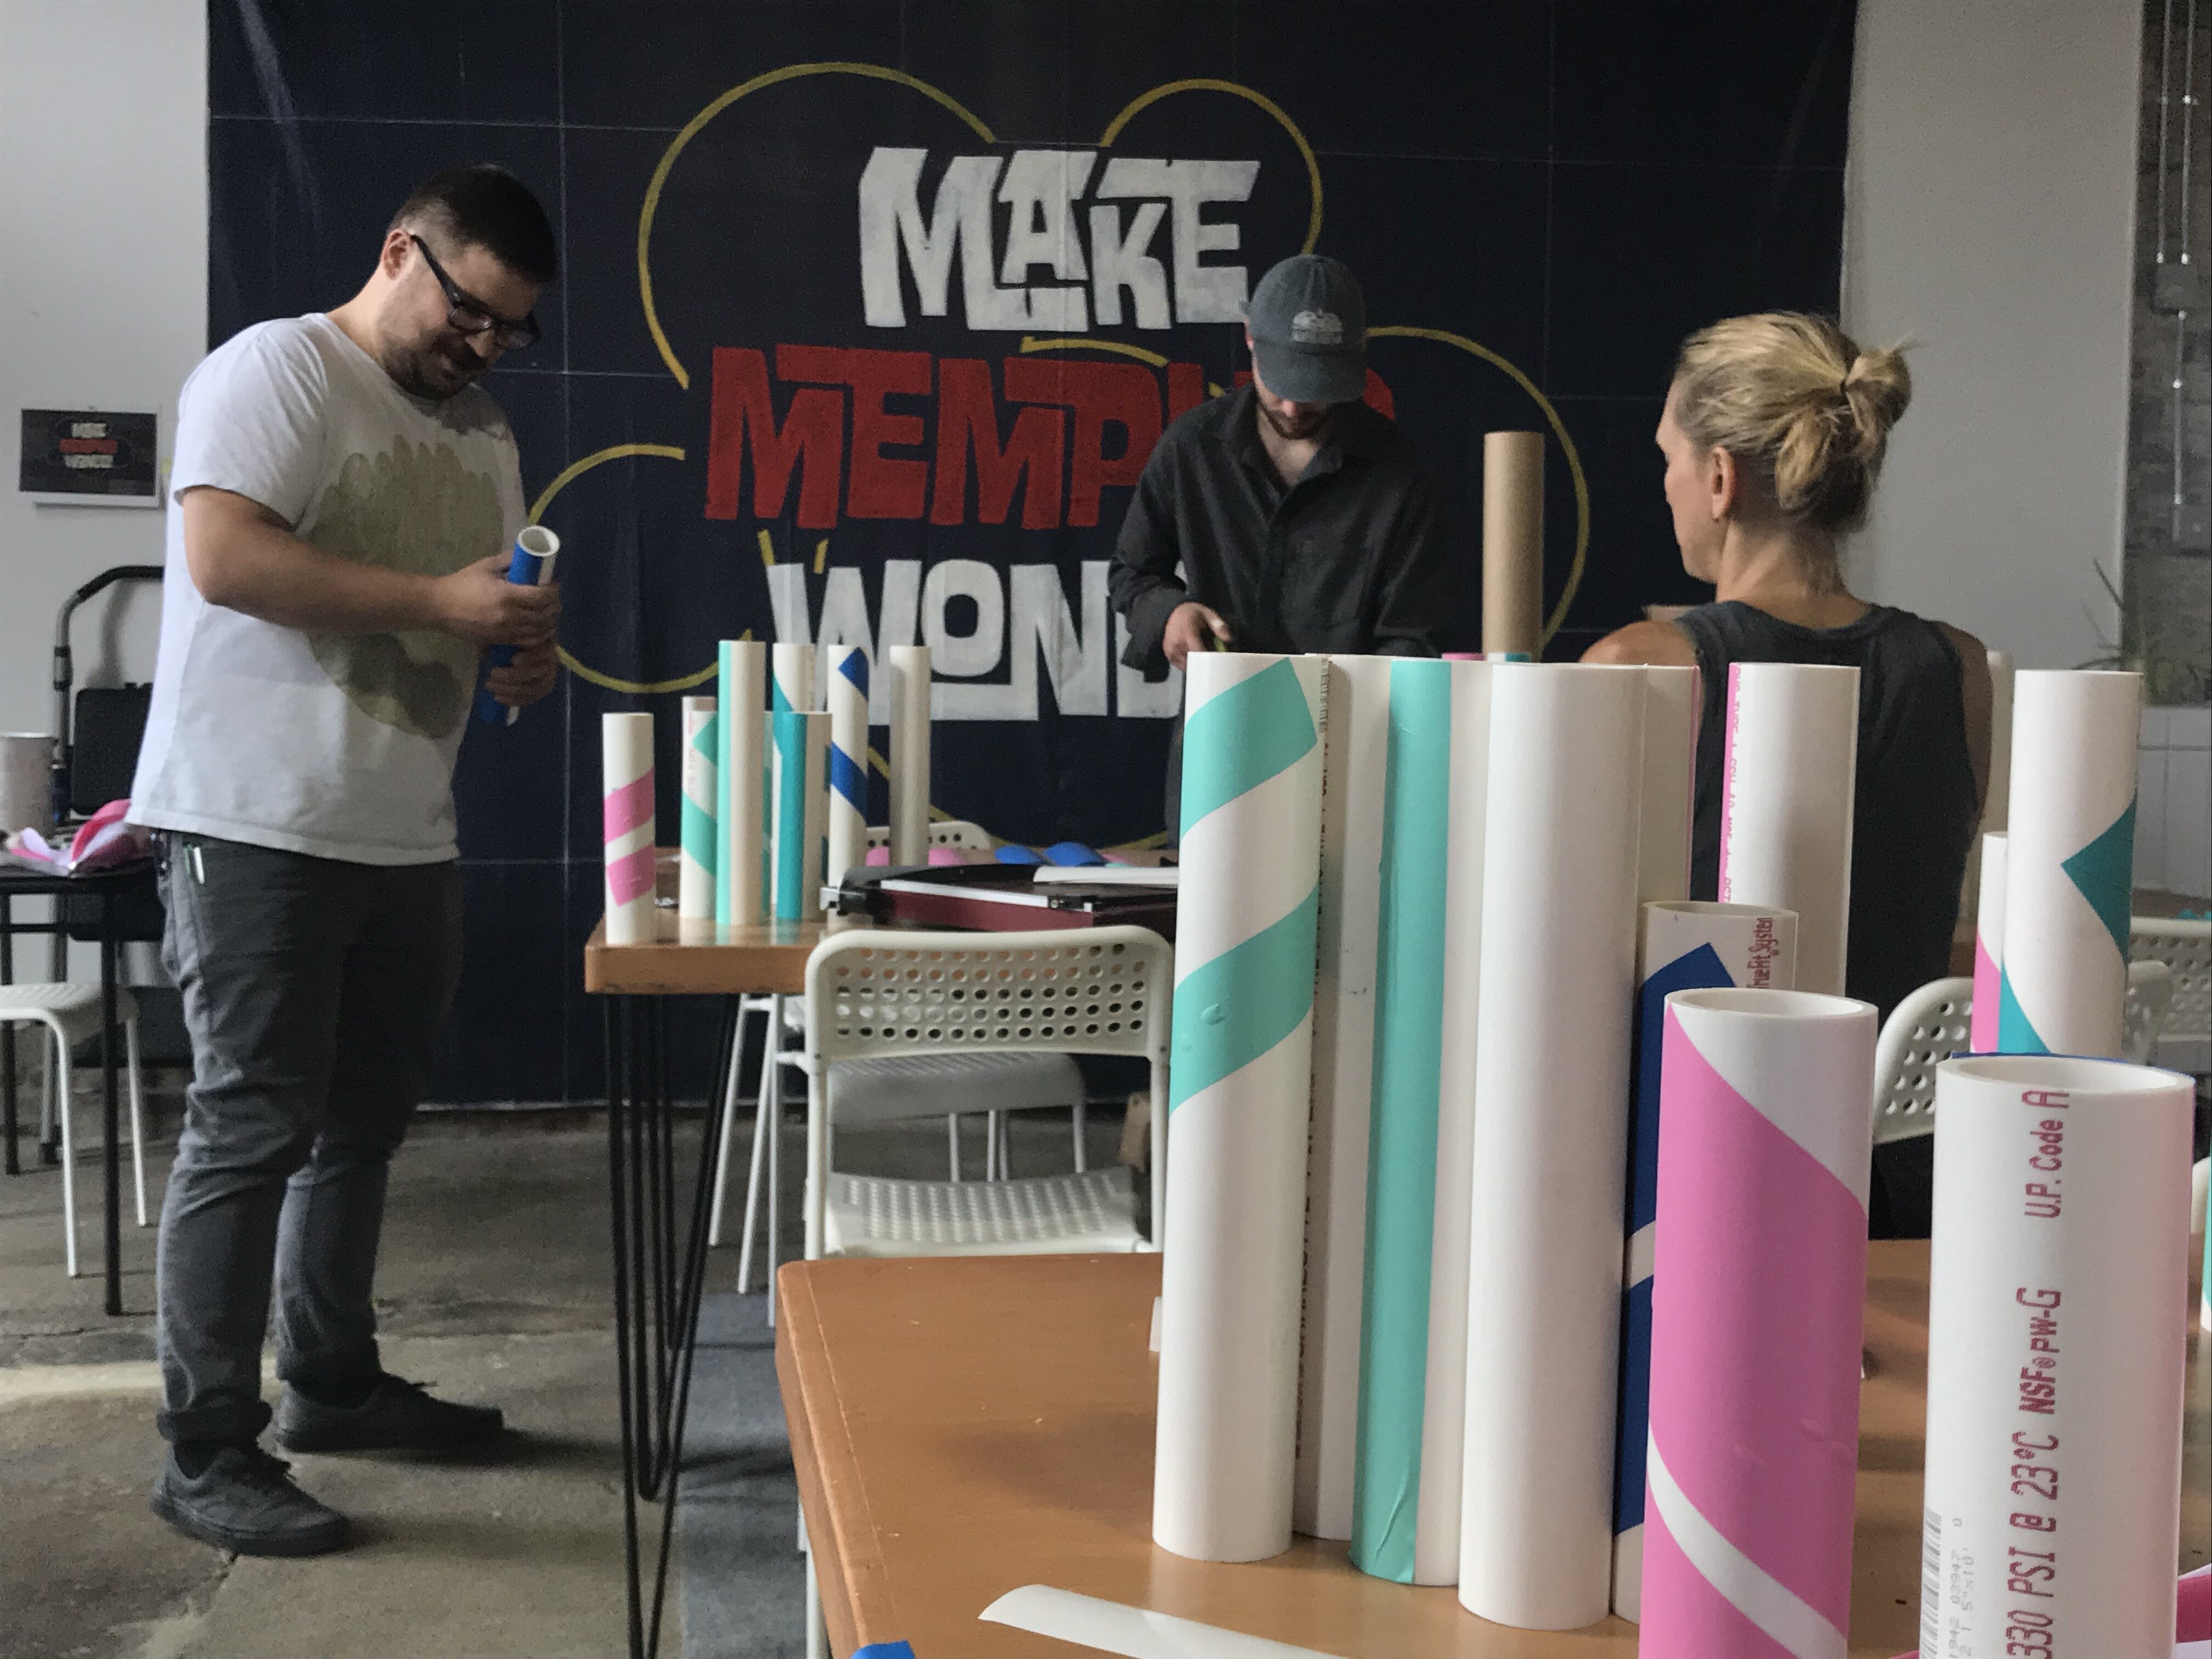 Members of the Creatives in Research team assemble tubing that will become 35 umbrella stands strategically placed throughout Madison Heights. (Wonder / Cowork / Create)